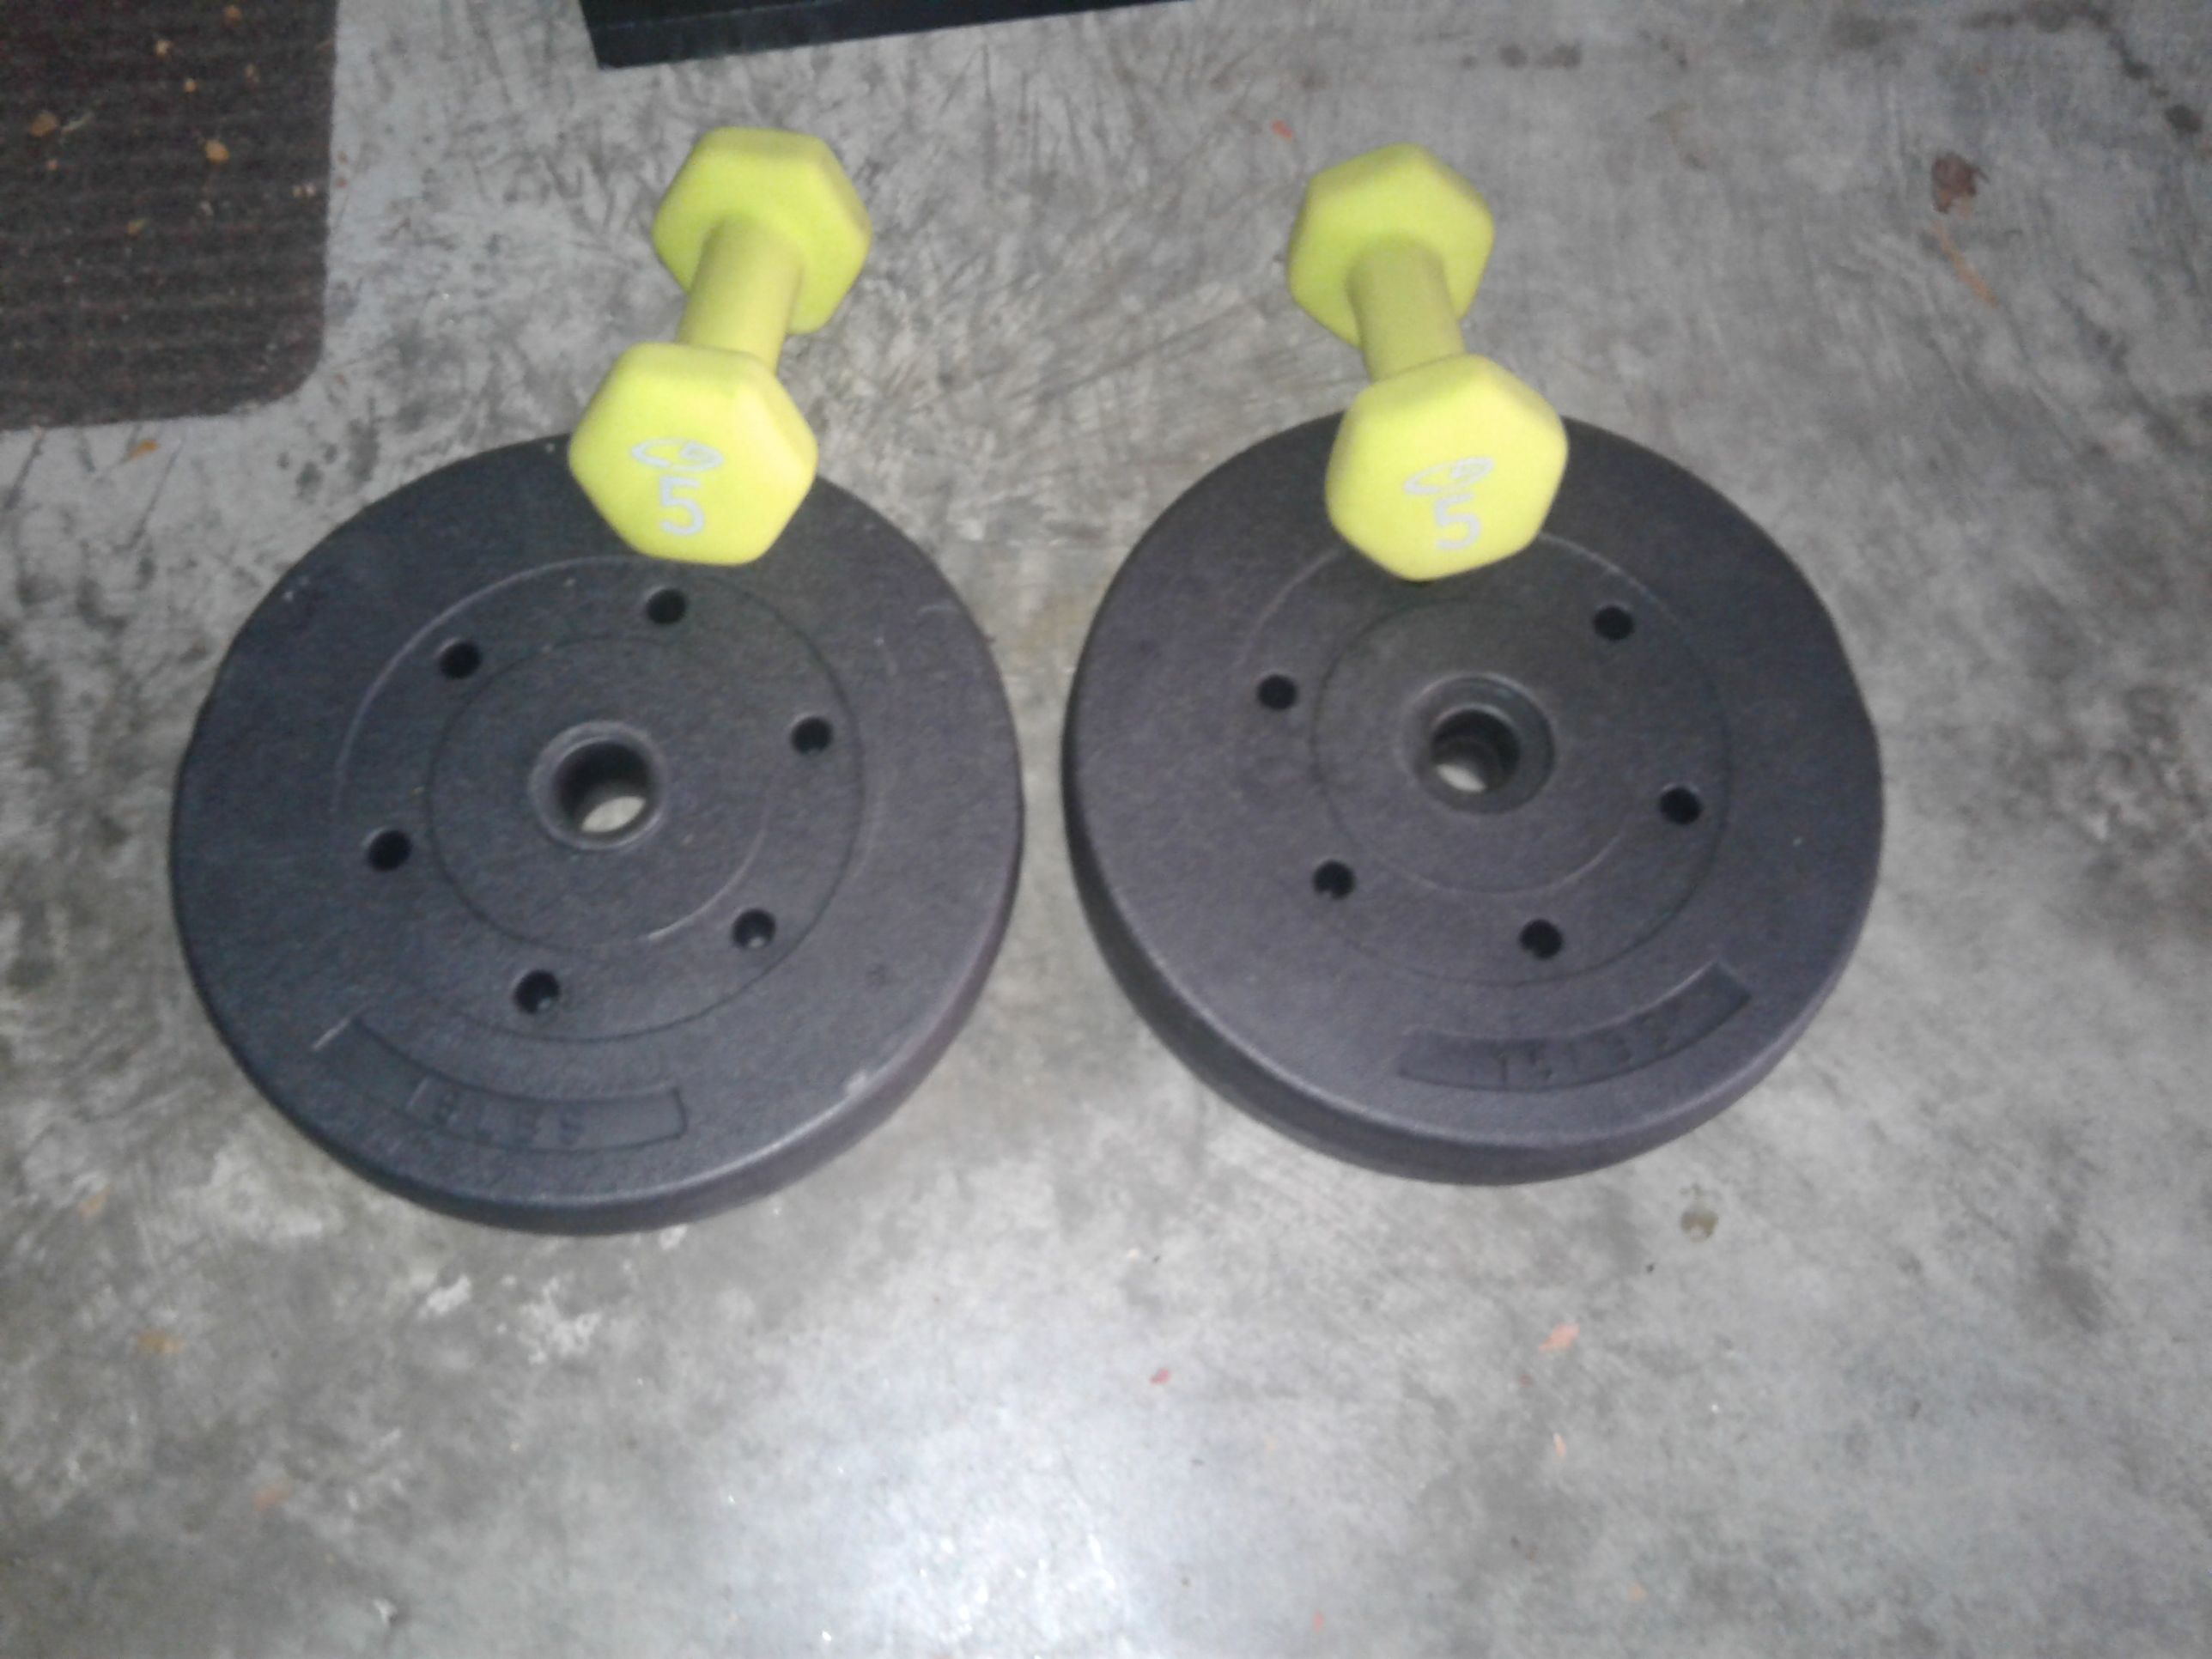 Neoprene 2 - 5 lb hand weights and dumbbells